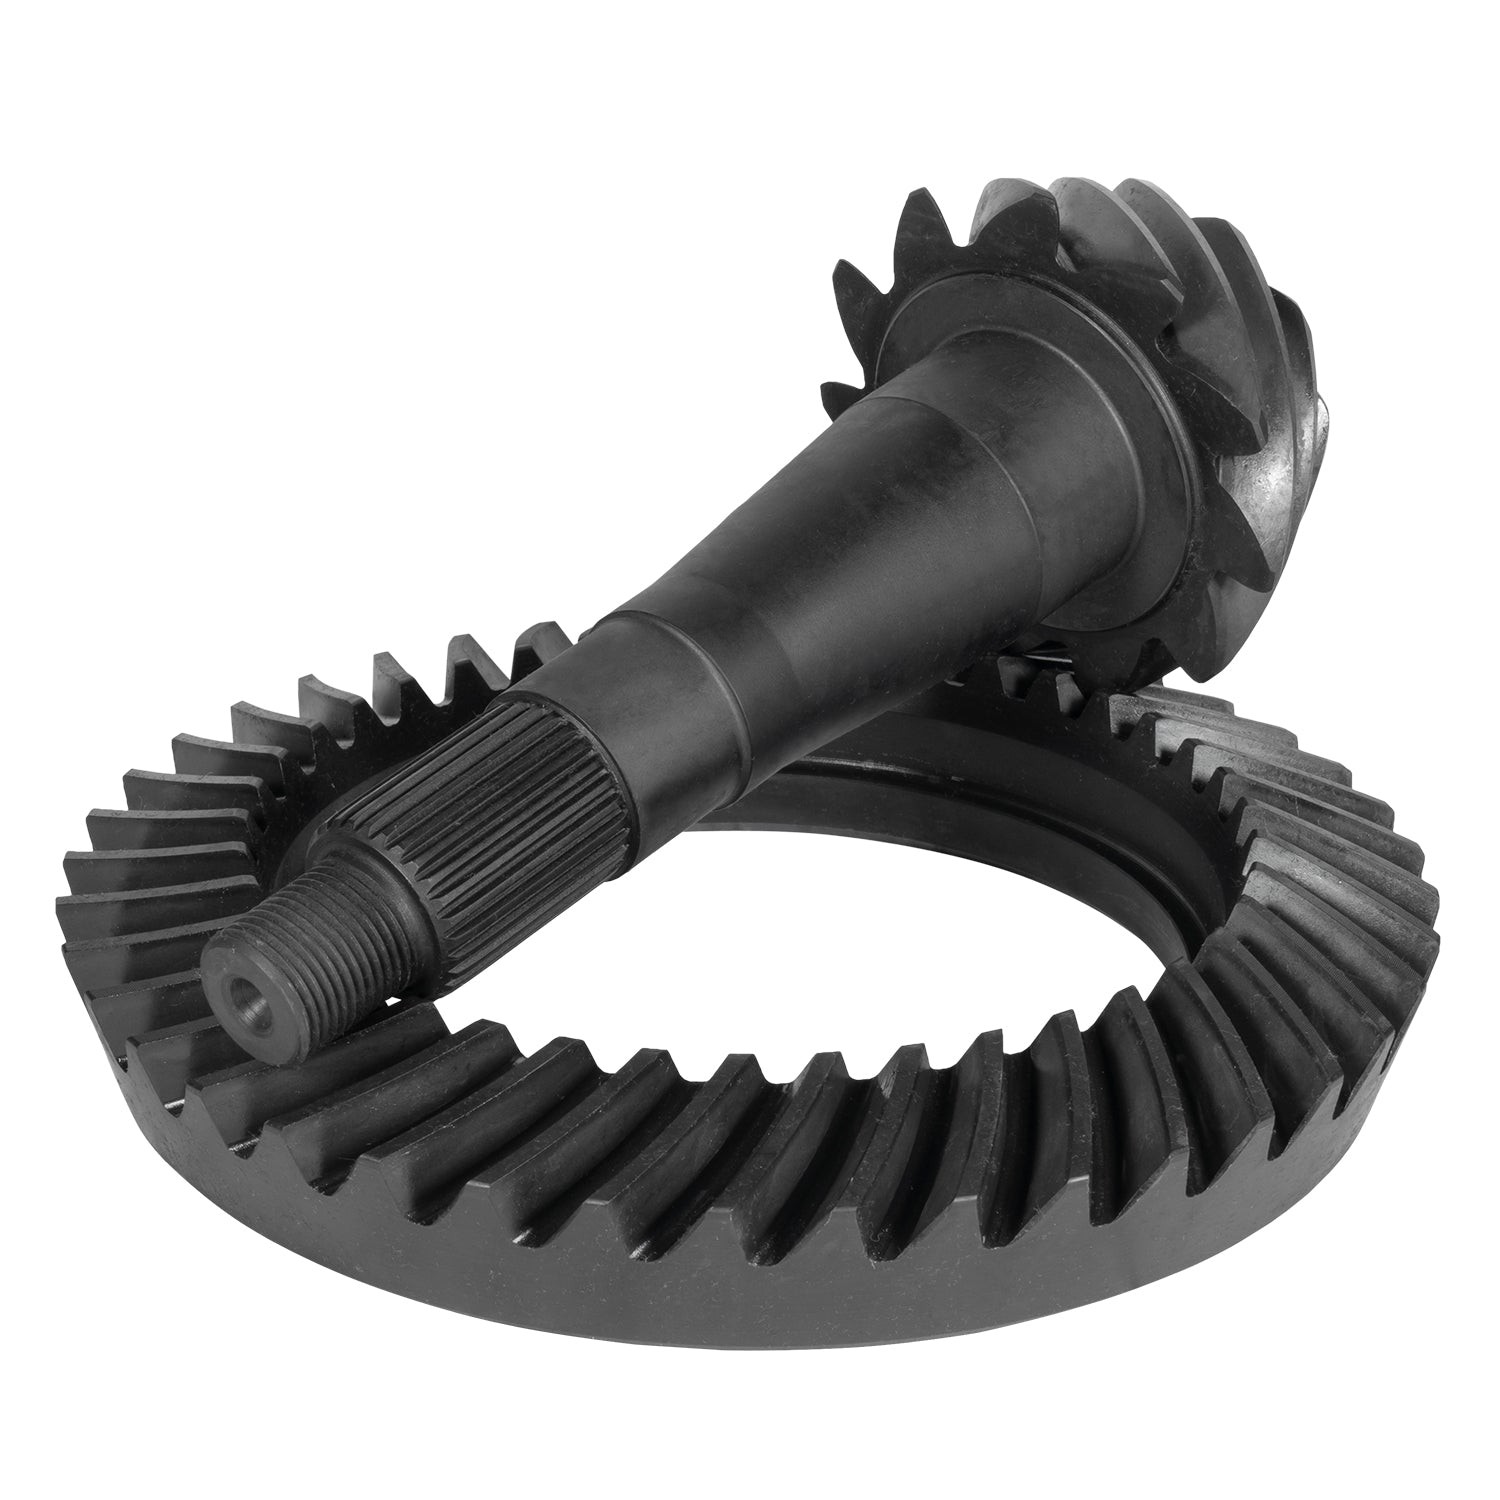 Yukon Gear Chrysler Dodge Plymouth Differential Ring and Pinion Kit - Rear YGK2346